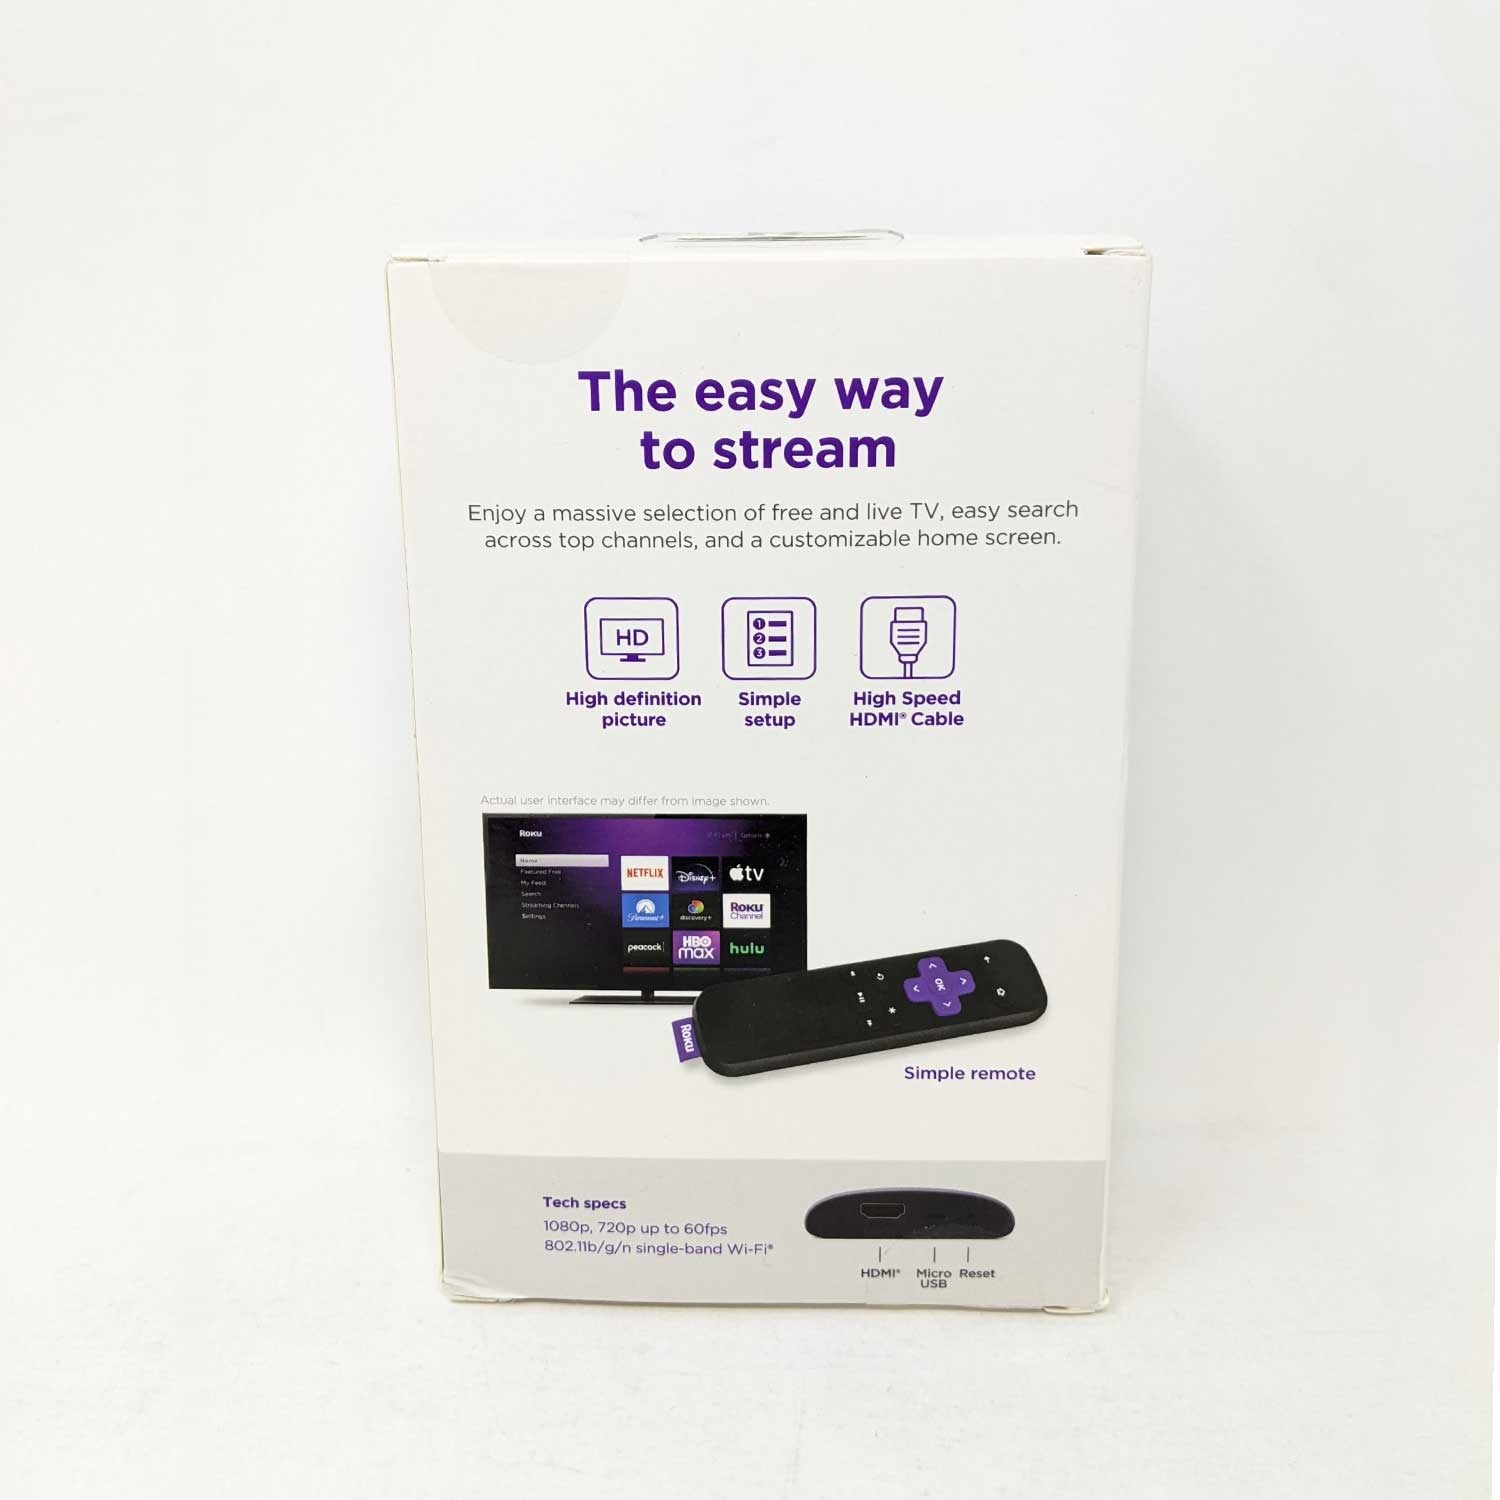 Roku LE HD Streaming Media Player with High Speed HDMI Cable & Simple Remote